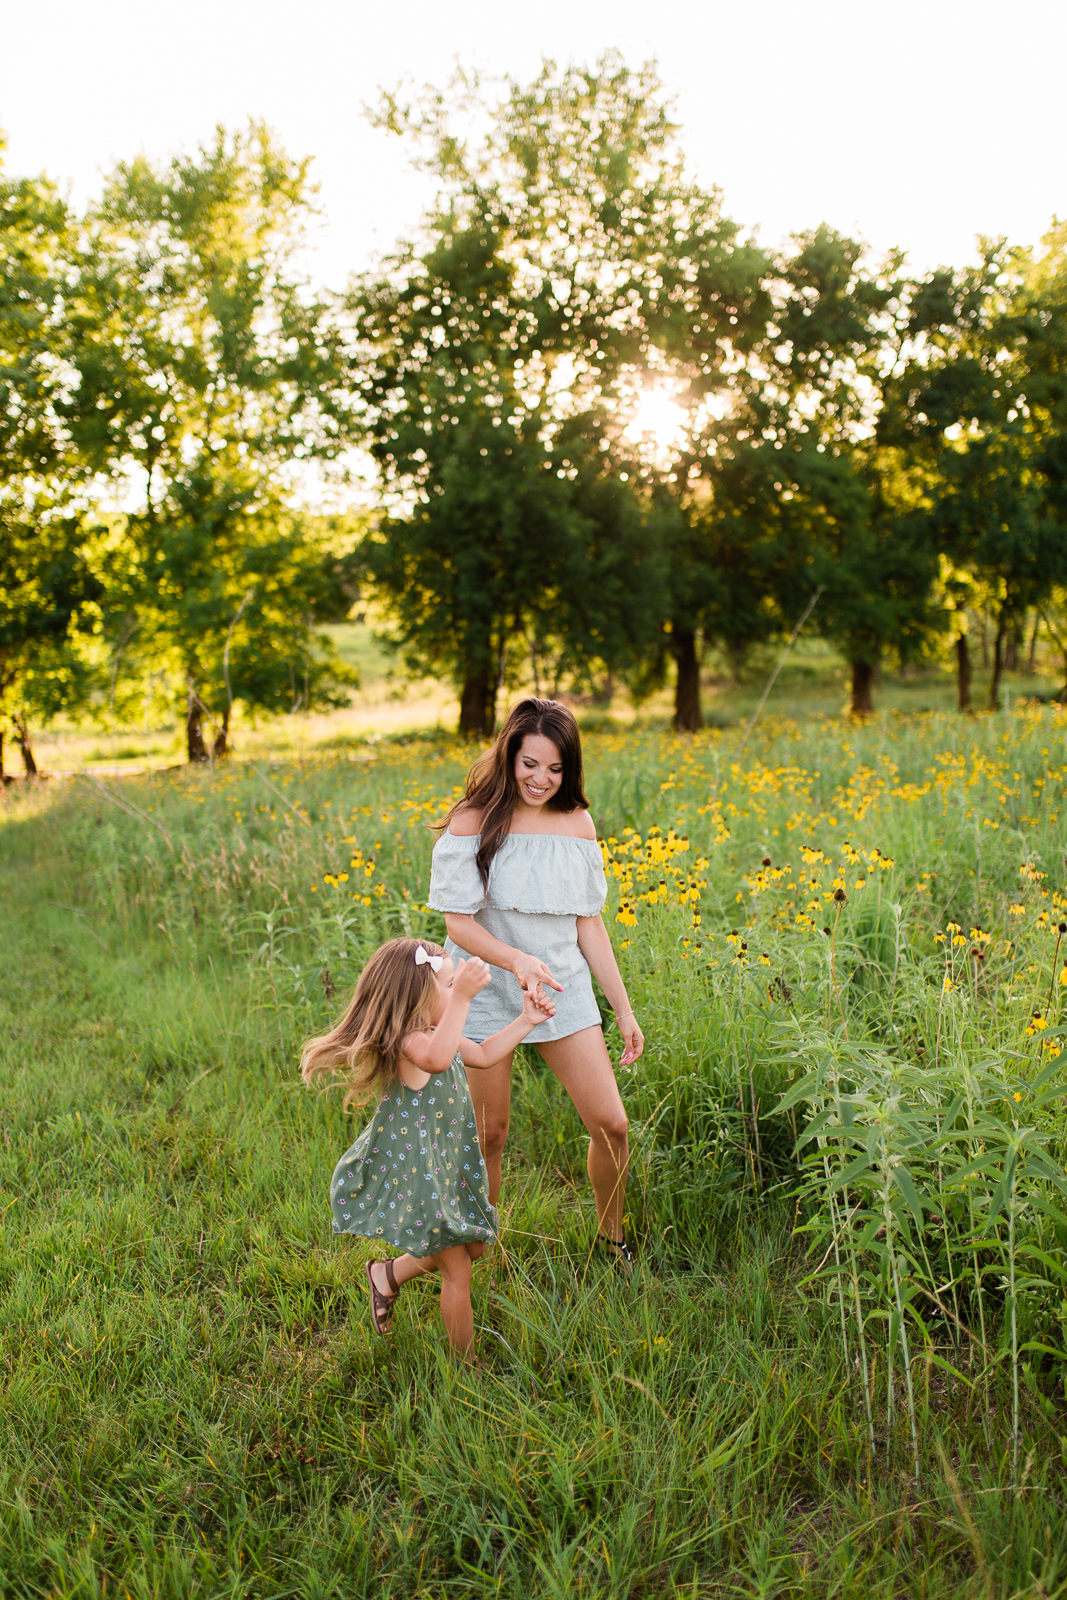  Mother dances with her daughter by a field of flowers, mommy and me session at Shawnee Mission Park, Kansas City family photographer 